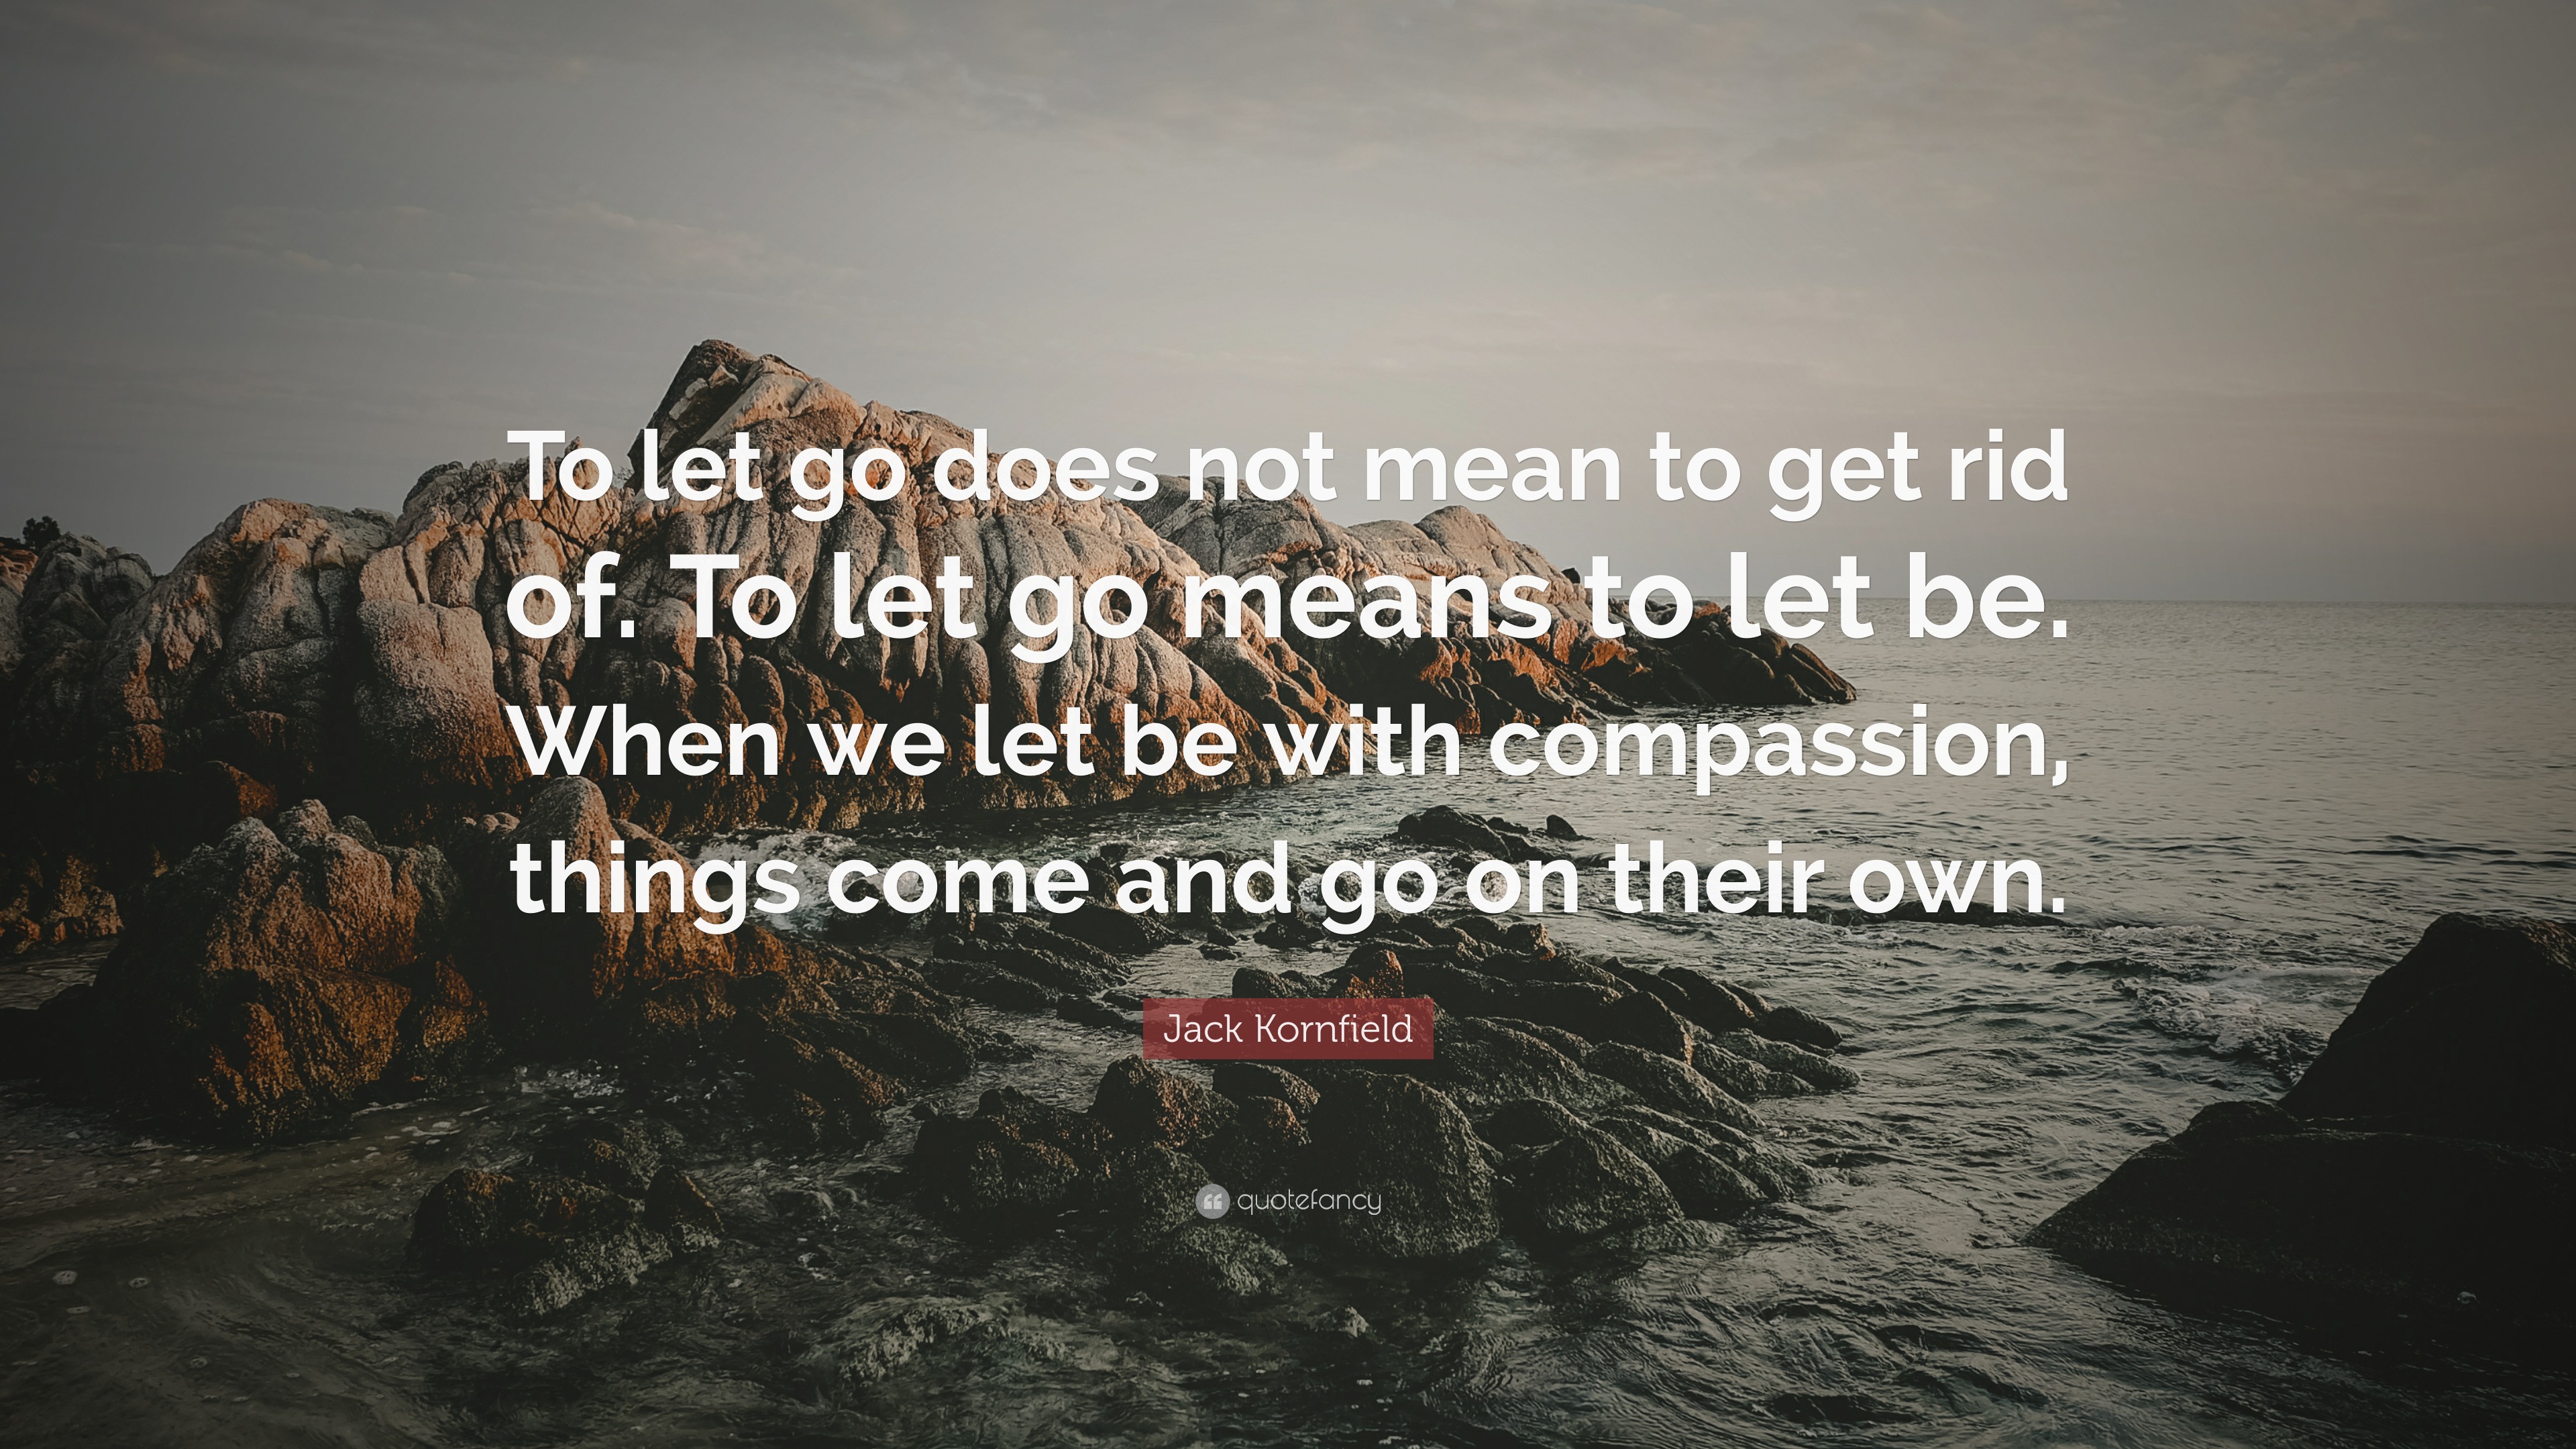 Jack Kornfield Quote: “To let go does not mean to get rid of. To let go ...